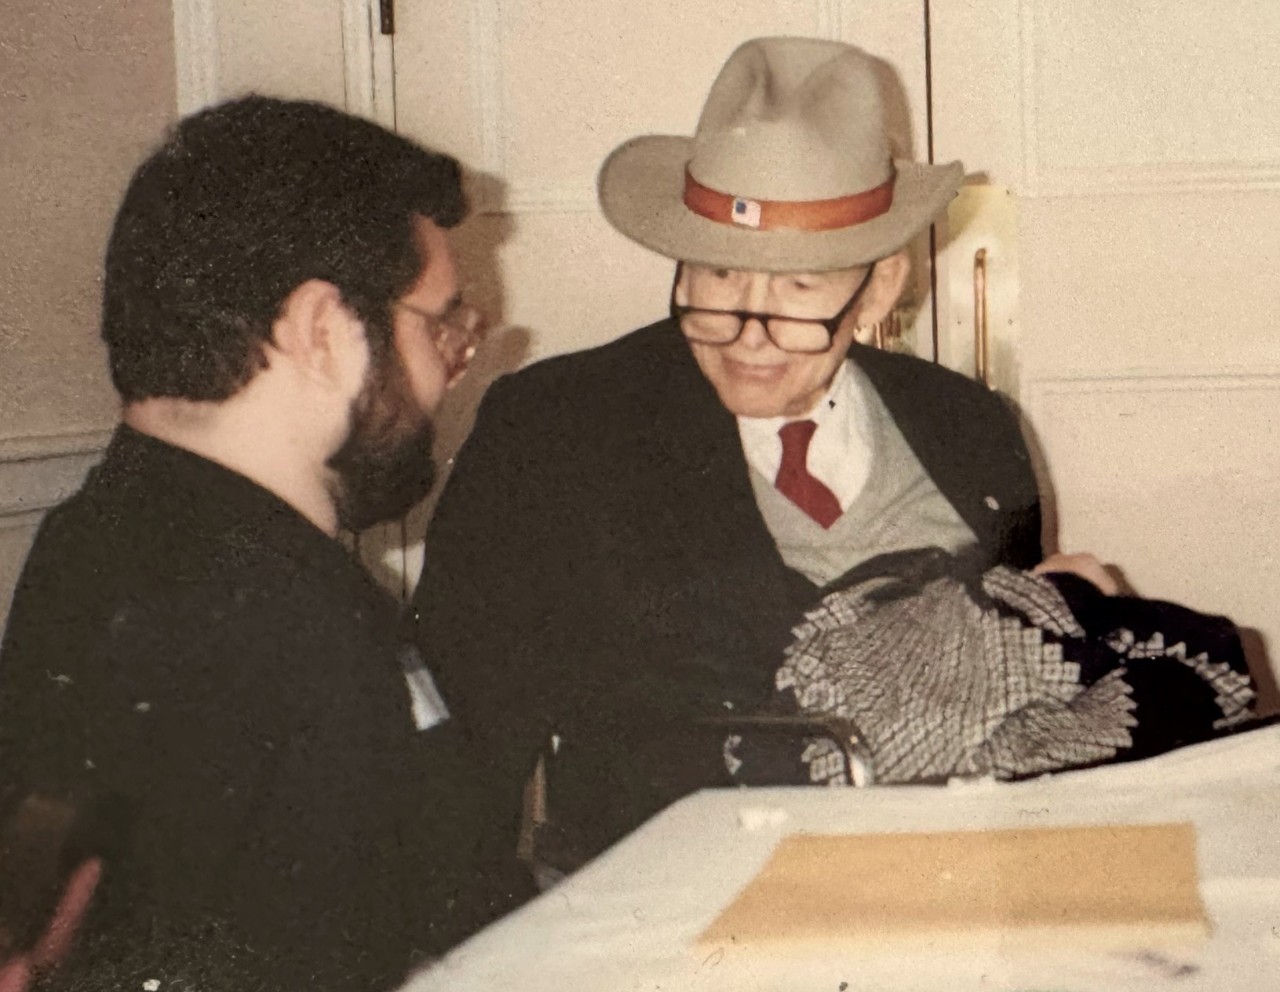 A banner photo at the beginning of the article shows a young, white man with dark hair and beard and glasses seated with an older, white man wearing a tan hat, reading glasses, and a tie, sweater vest, and suit jacket. 